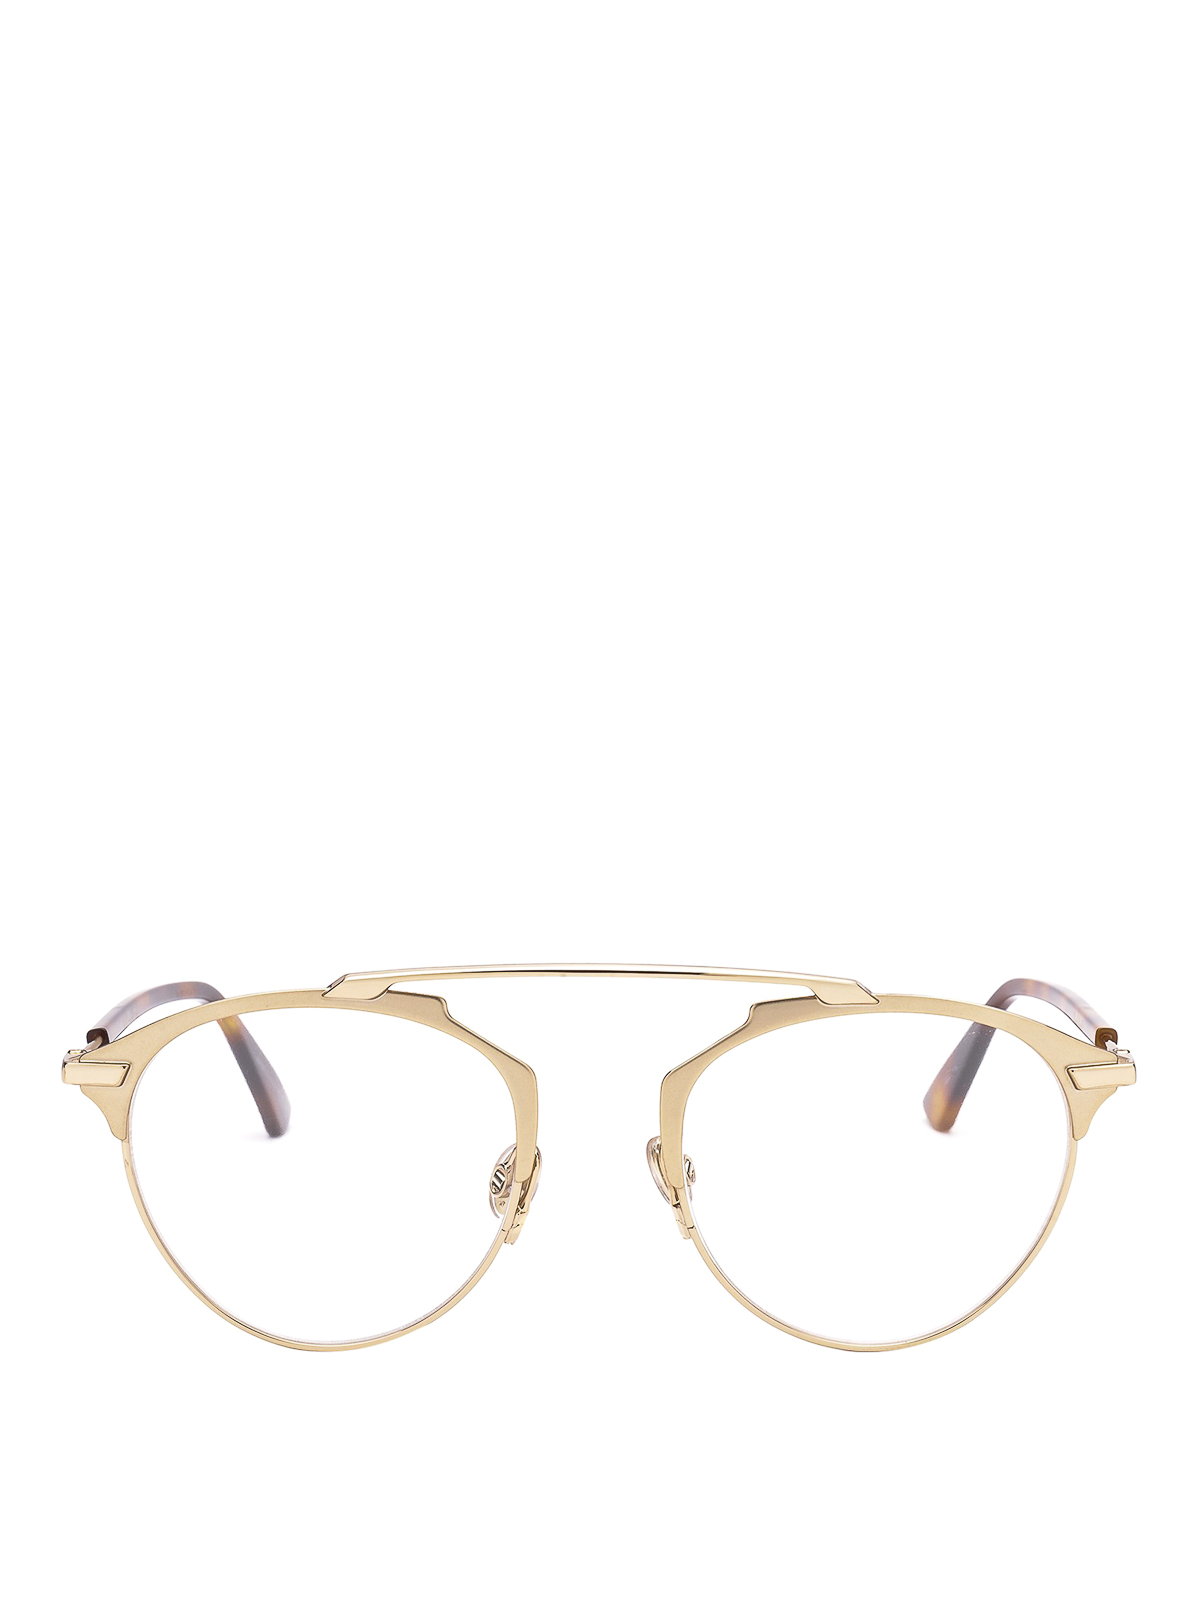 dior spectacles